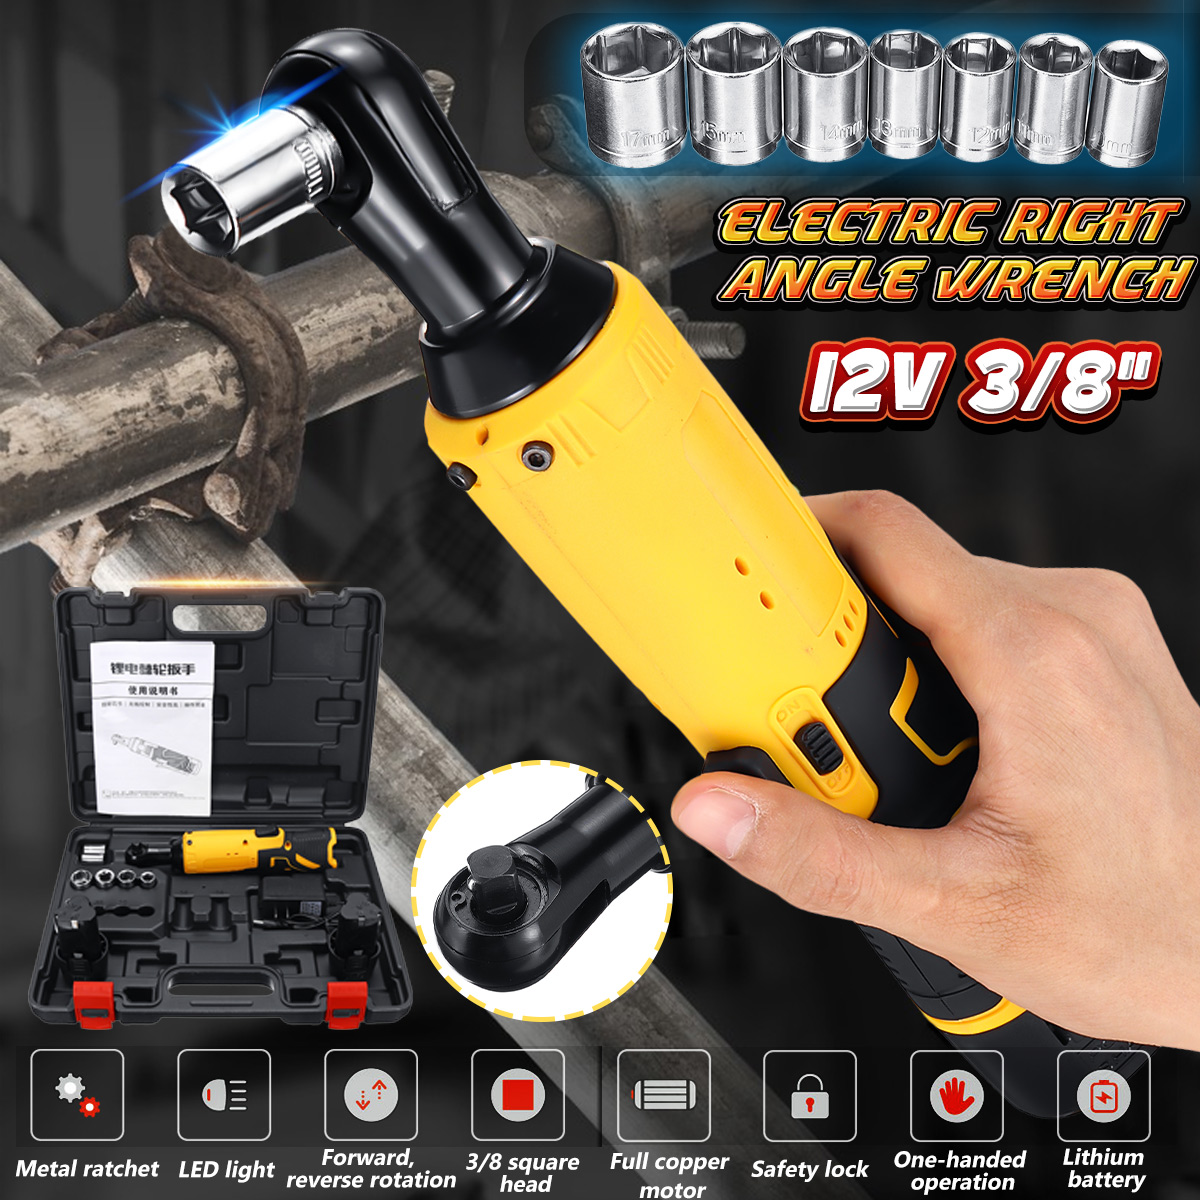 12V-45Nm-LED-Cordless-Electric-Ratchet-Wrench-38-Inch-Chuck-Right-Angle-Wrench-Tool-W-1-or-2-Li-ion--1452058-2